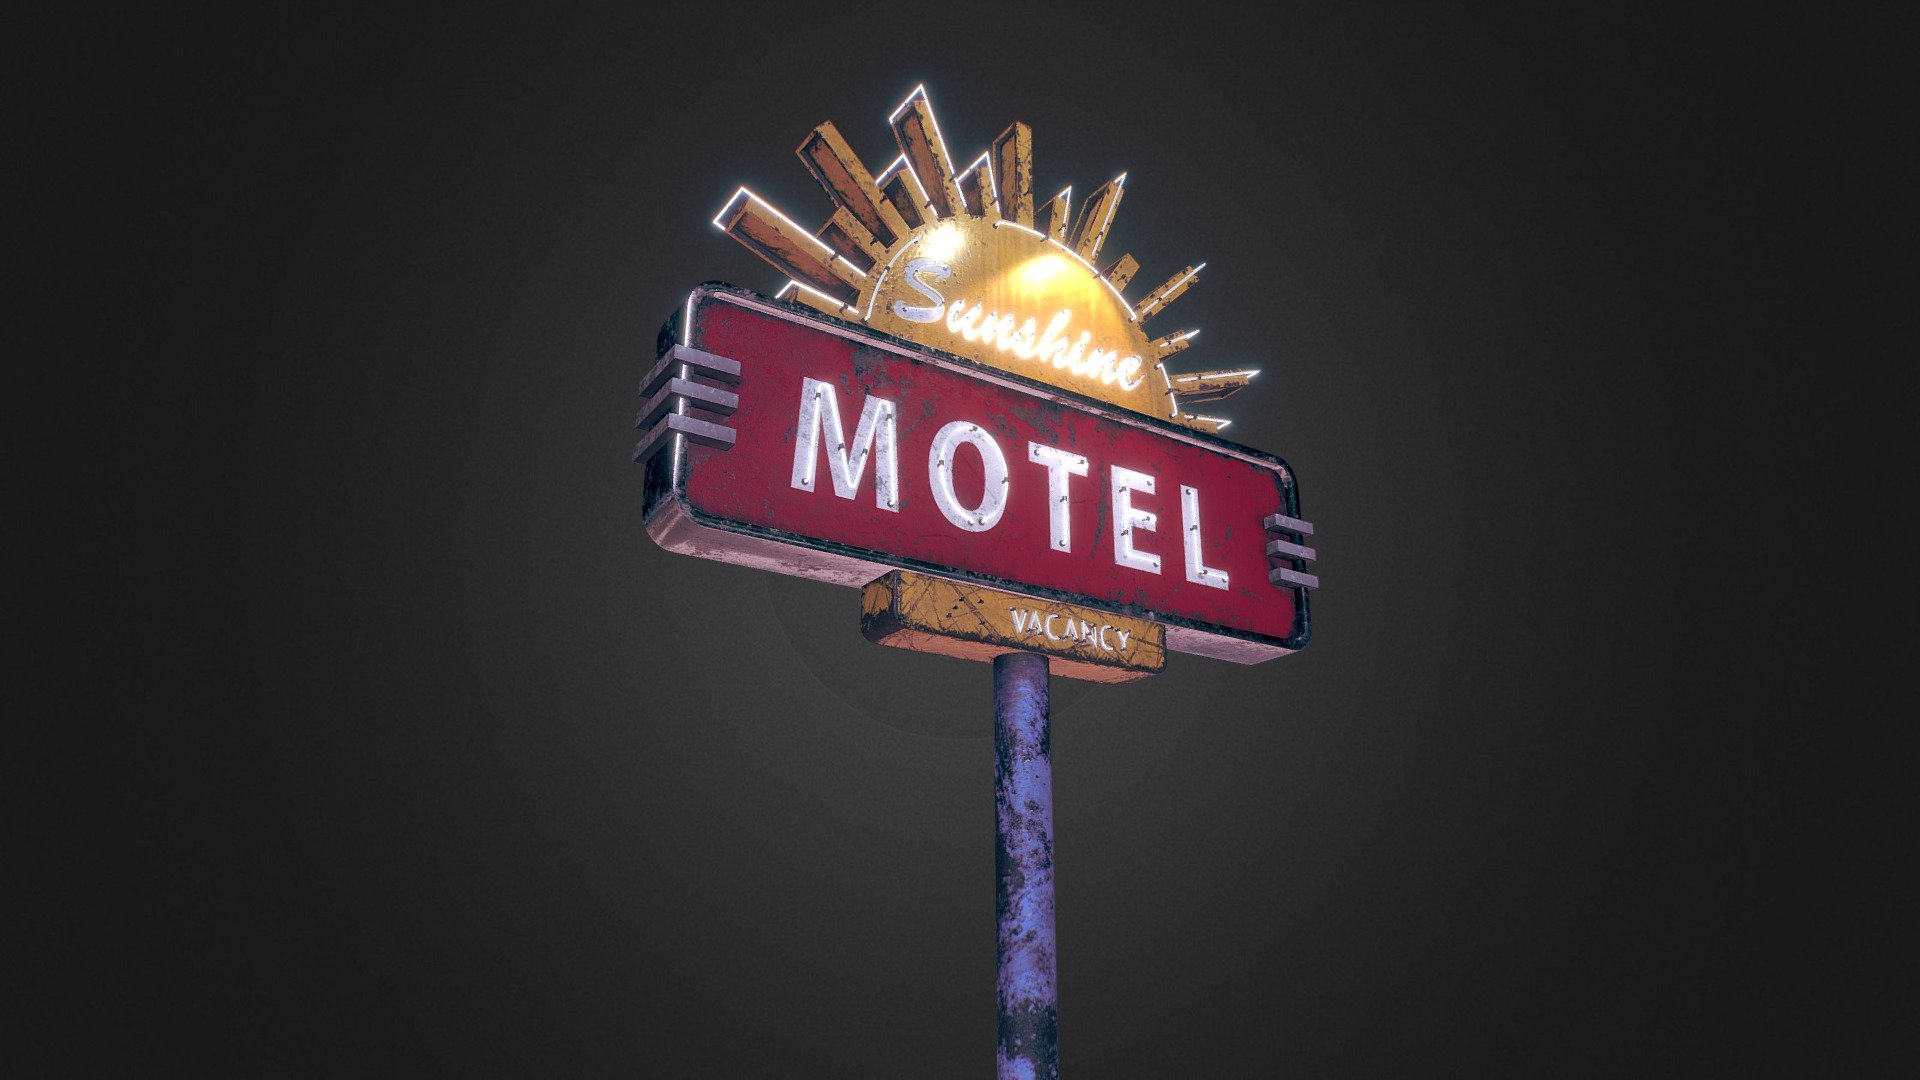 After watching television miniseries I decided to make this sign) - Sunshine Motel - 3D model by Alex (@allsocks) 3d model